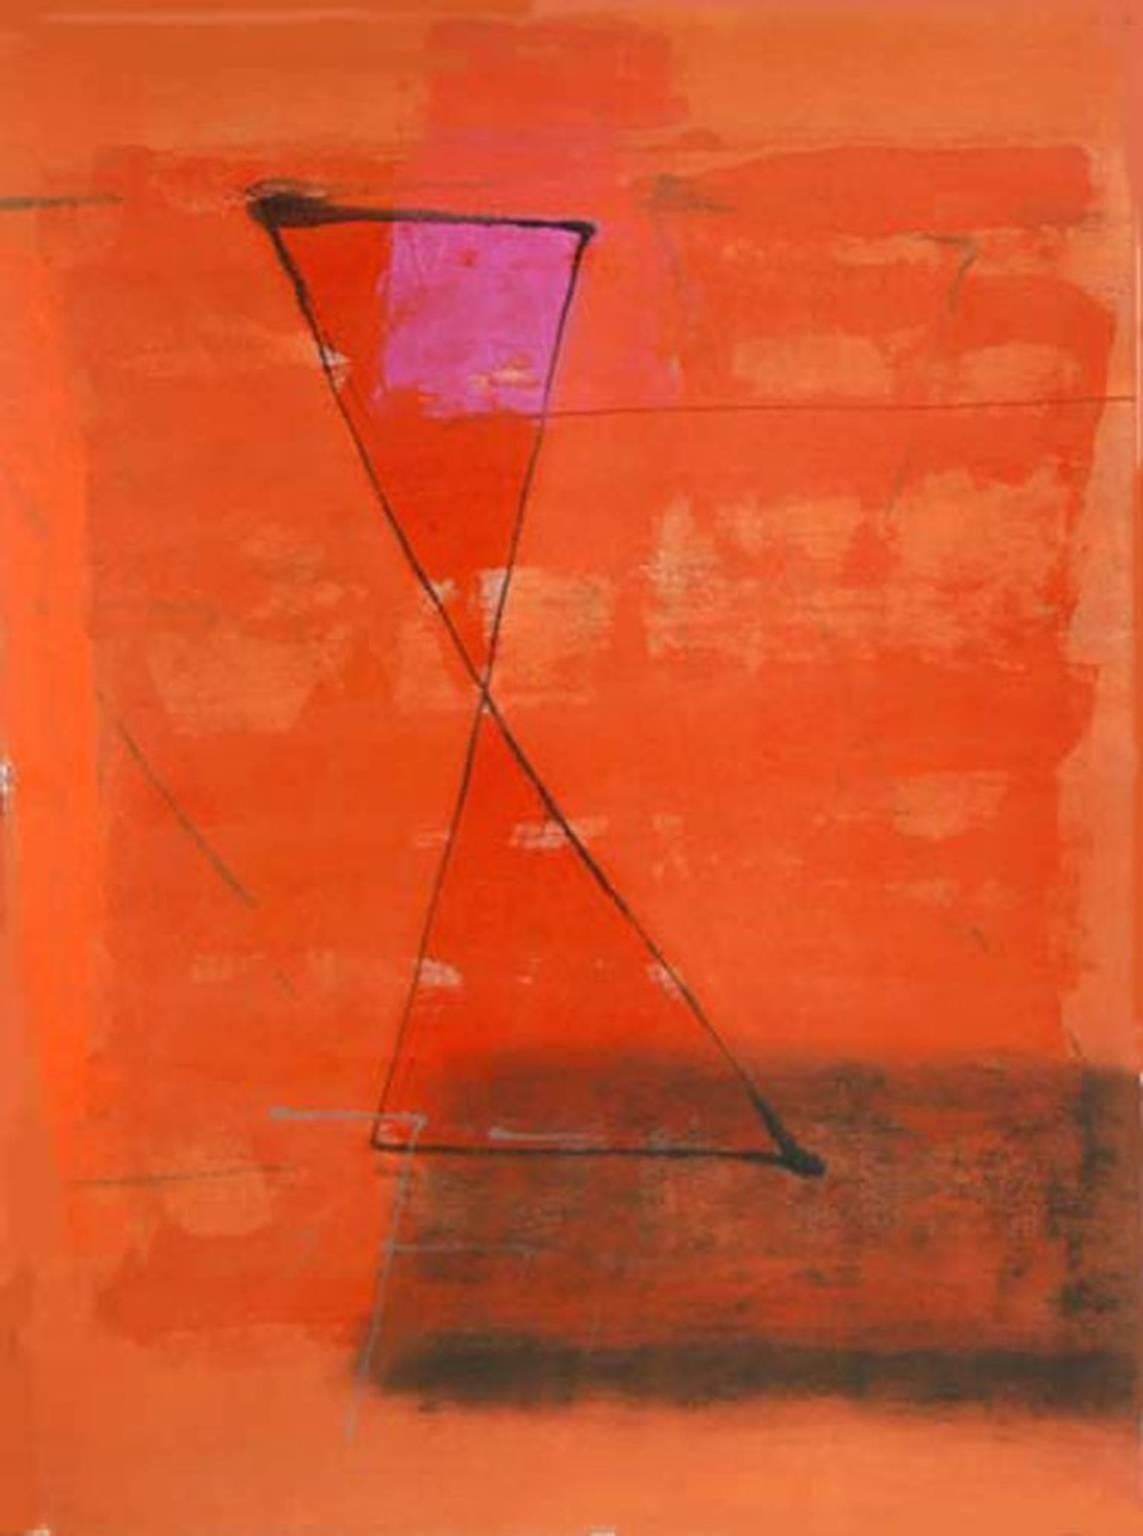 S. Harsha Vardhana Abstract Painting - Abstract, Mixed Media, Red, Orange by Son of the Artist J.Swaminathan "In Stock"